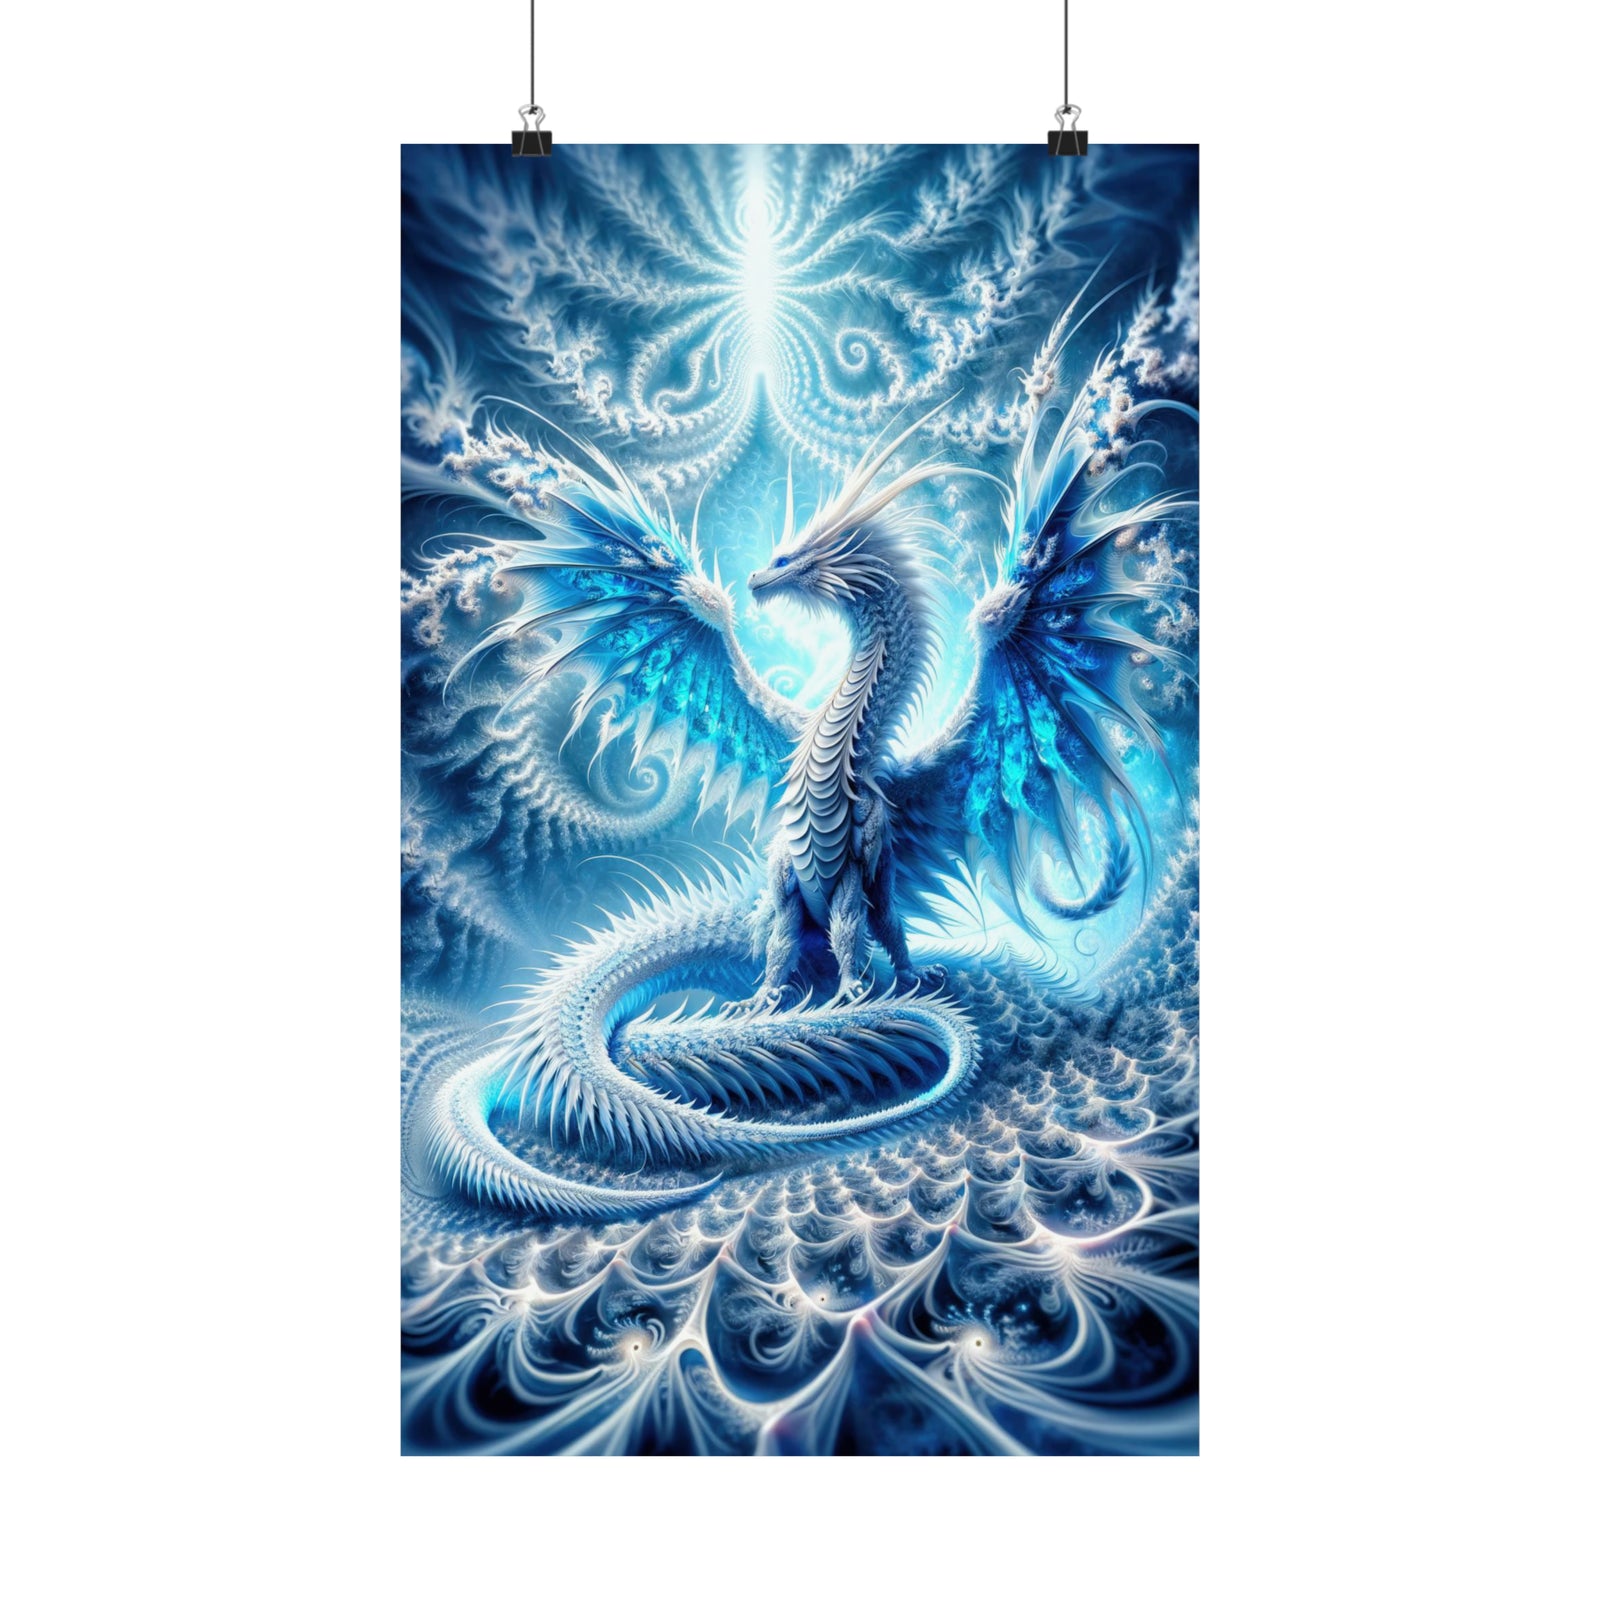 The Fractal Frost Dragon Poster